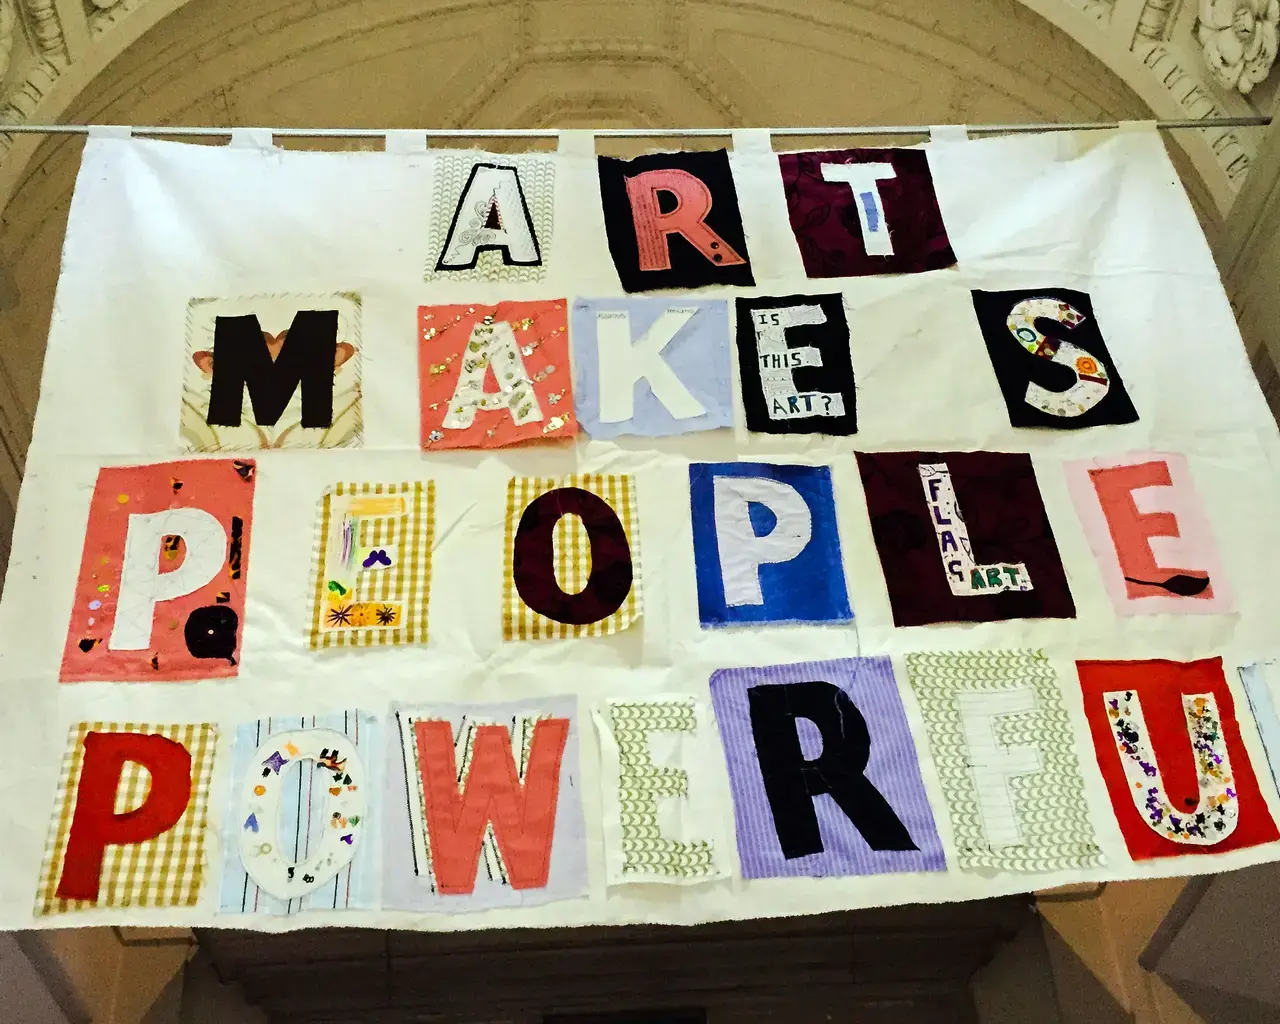 Bob and Roberta Smith, Art Makes People Powerful (2013). Fabric with applique and embroidery. Courtesy of the artist and Pierogi Gallery.